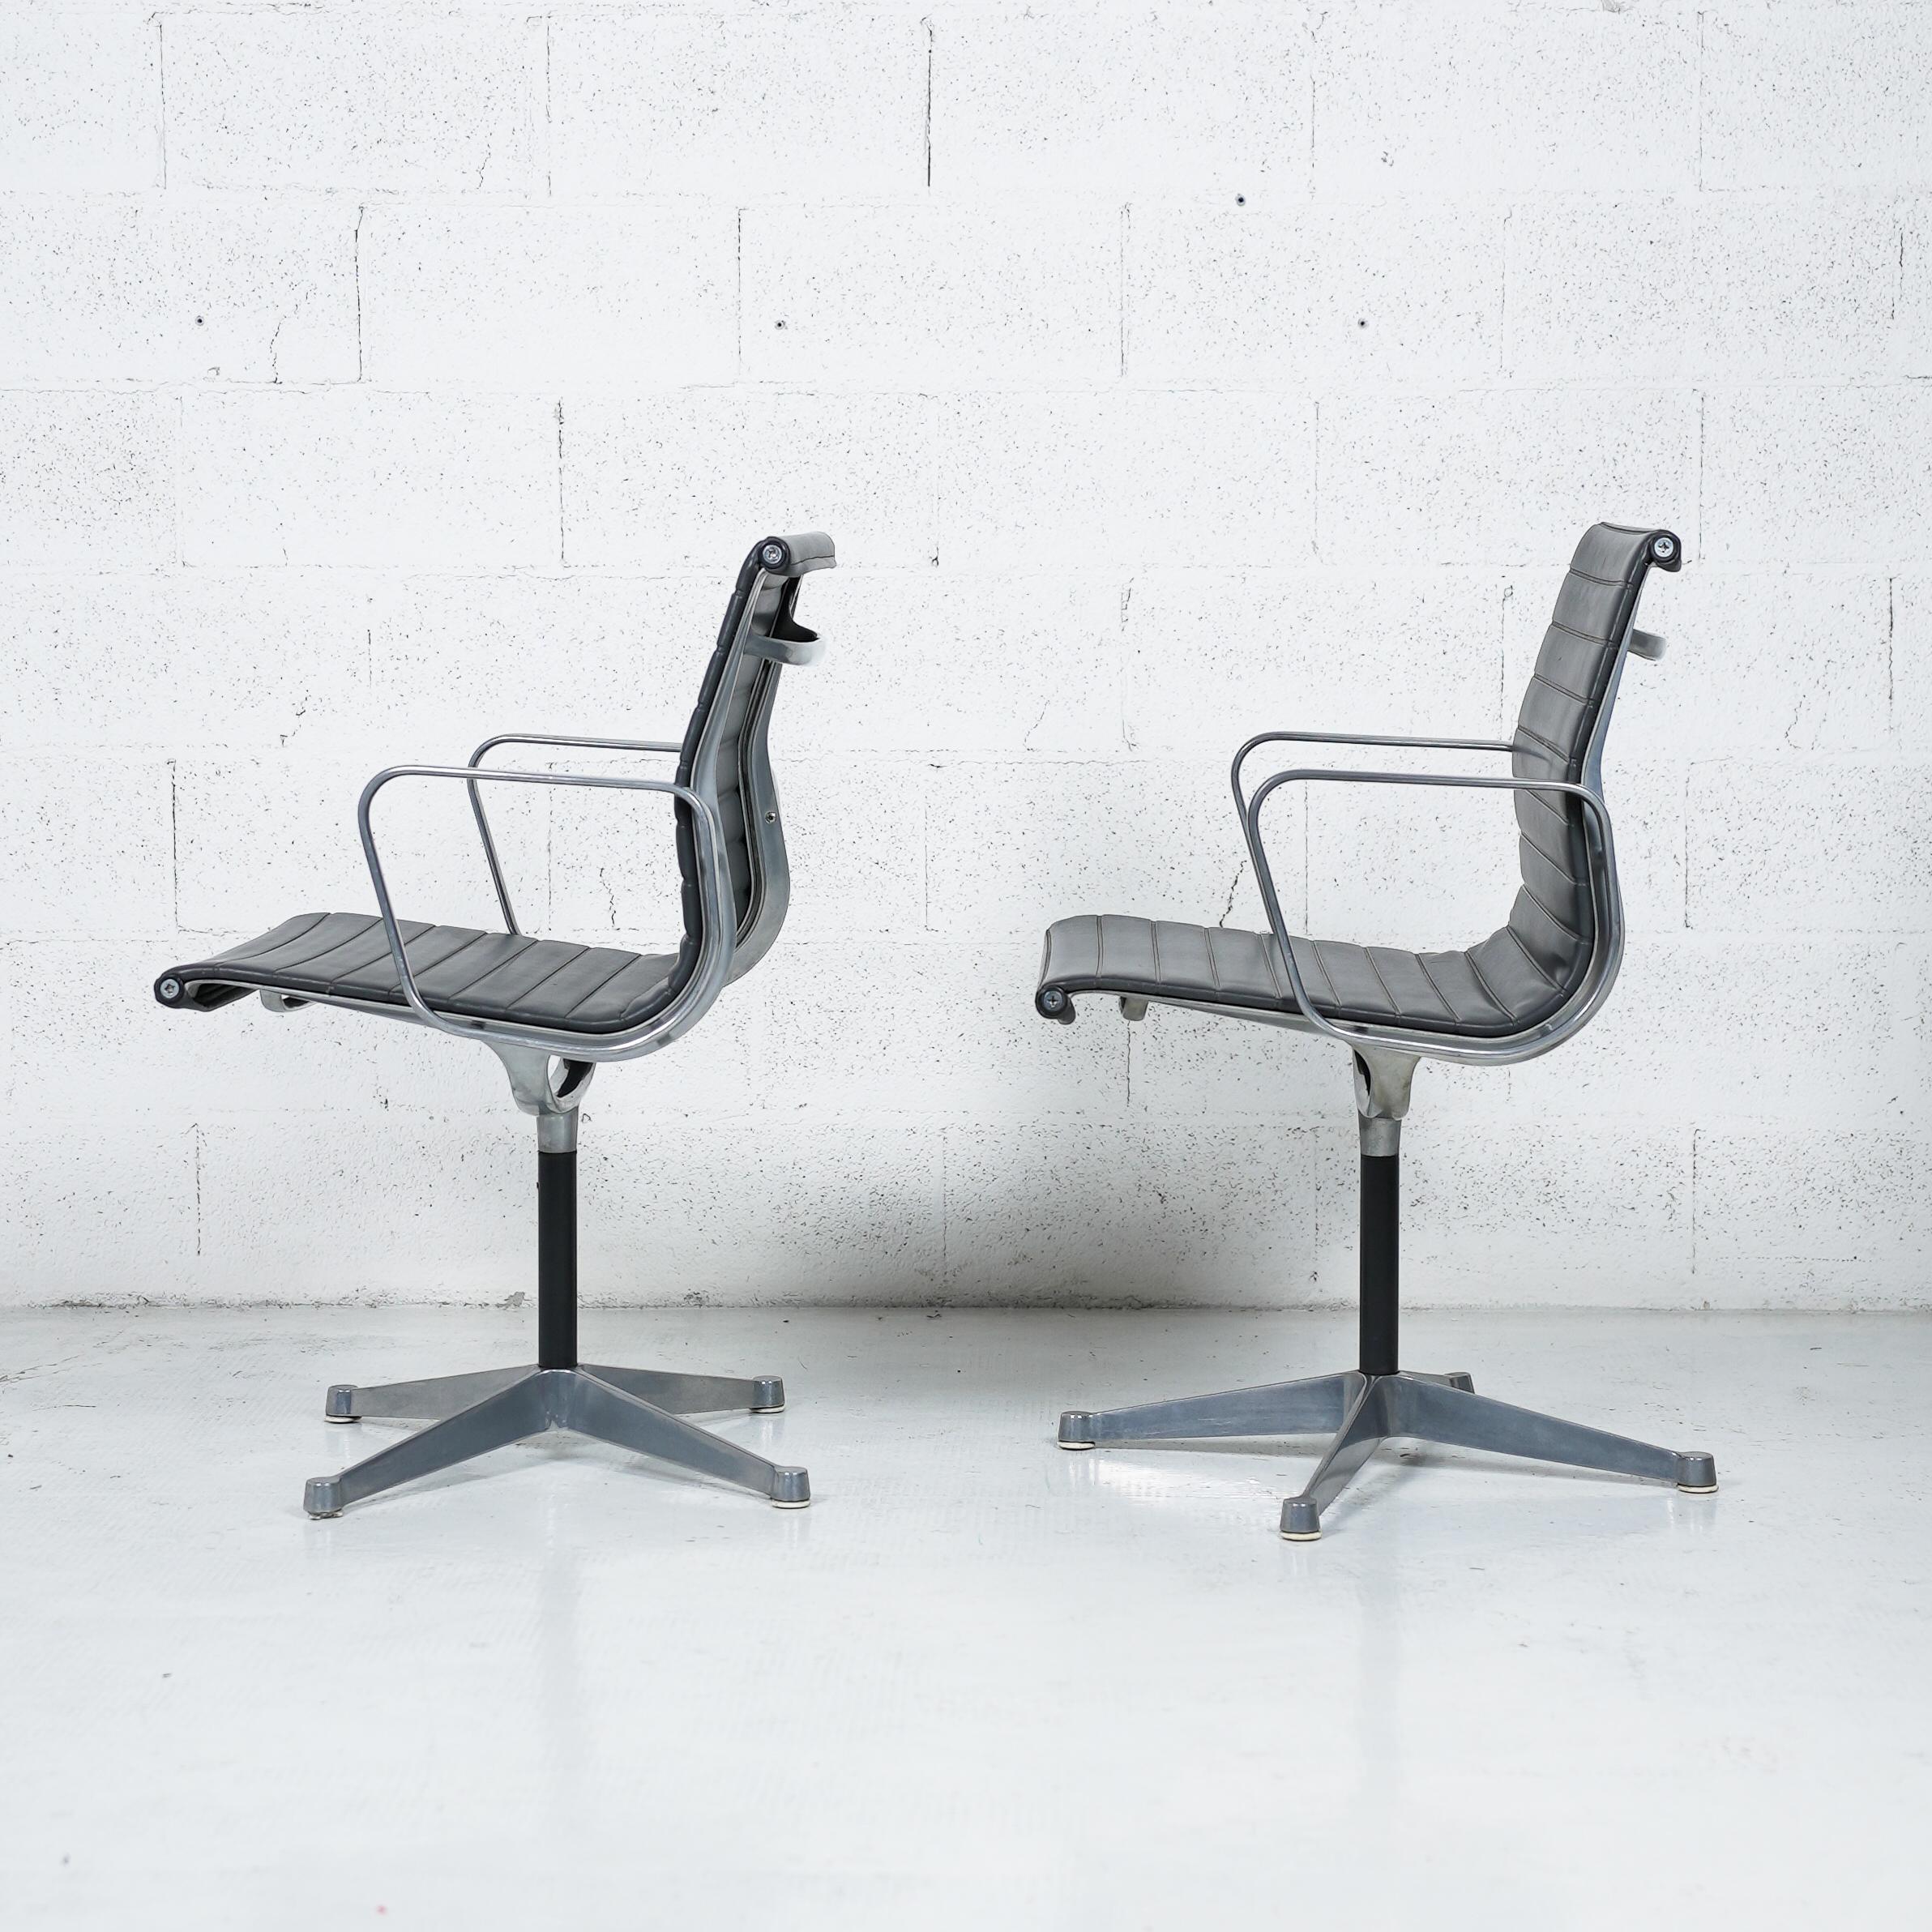 True icons of twentieth century design, the seats of the Aluminum Group series were designed by Charles and Ray Eames in the 1950s and were first created in 1958, defining what is still the standard for meeting chairs today. A clean and visible